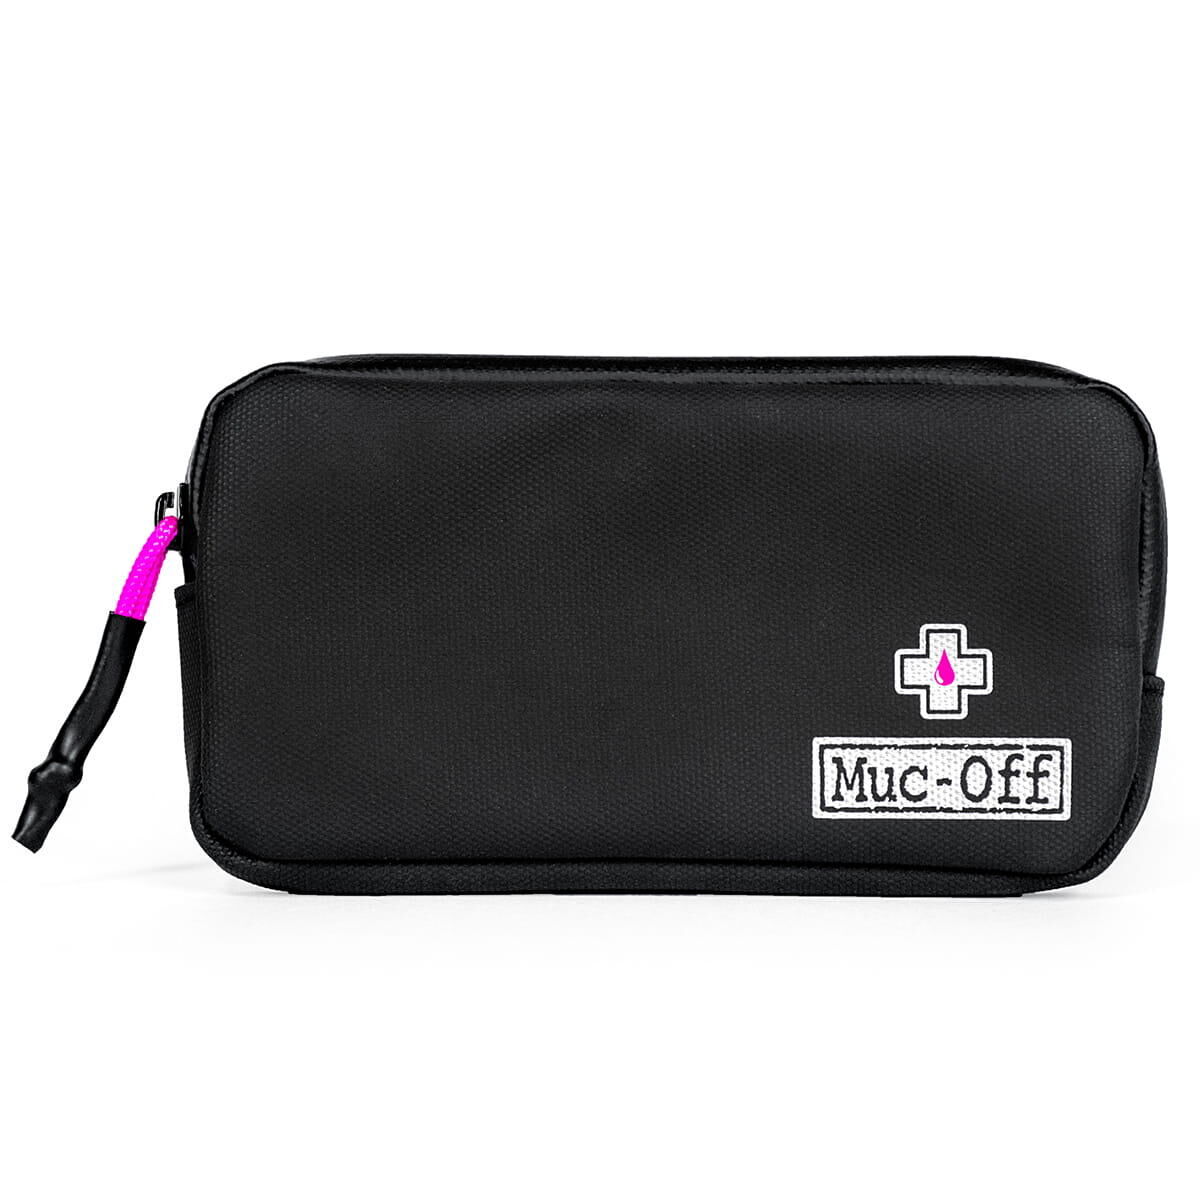 MUC-OFF Muc-Off Essentials Case Water Resistant Cycling Pocket Storage